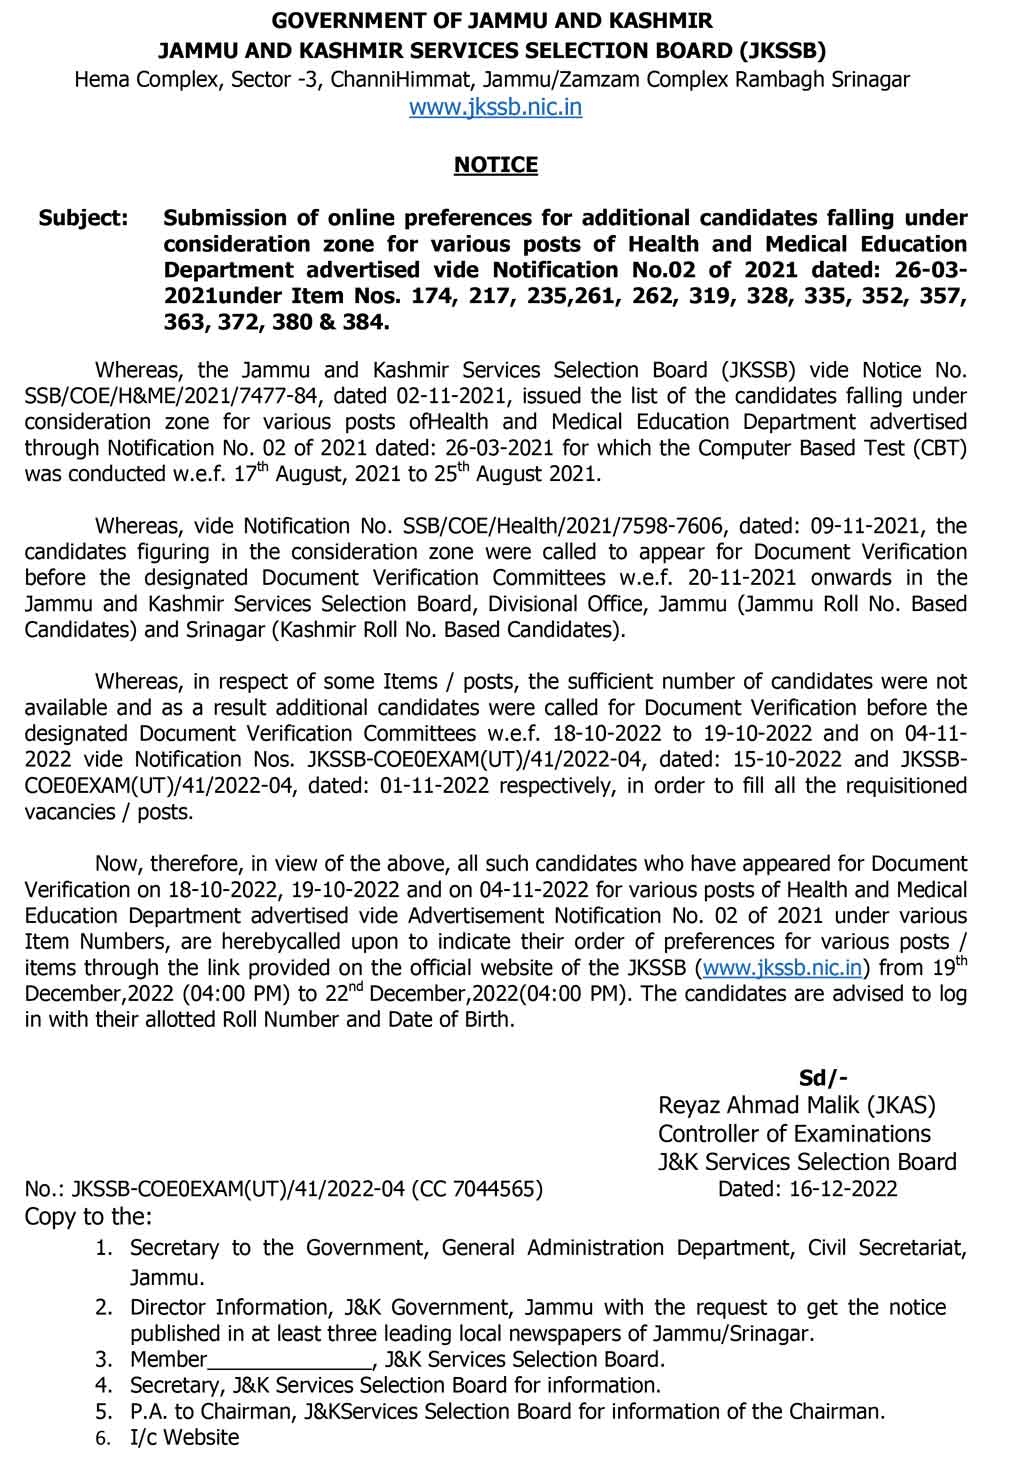 JKSSB notification regarding submission of online preference.